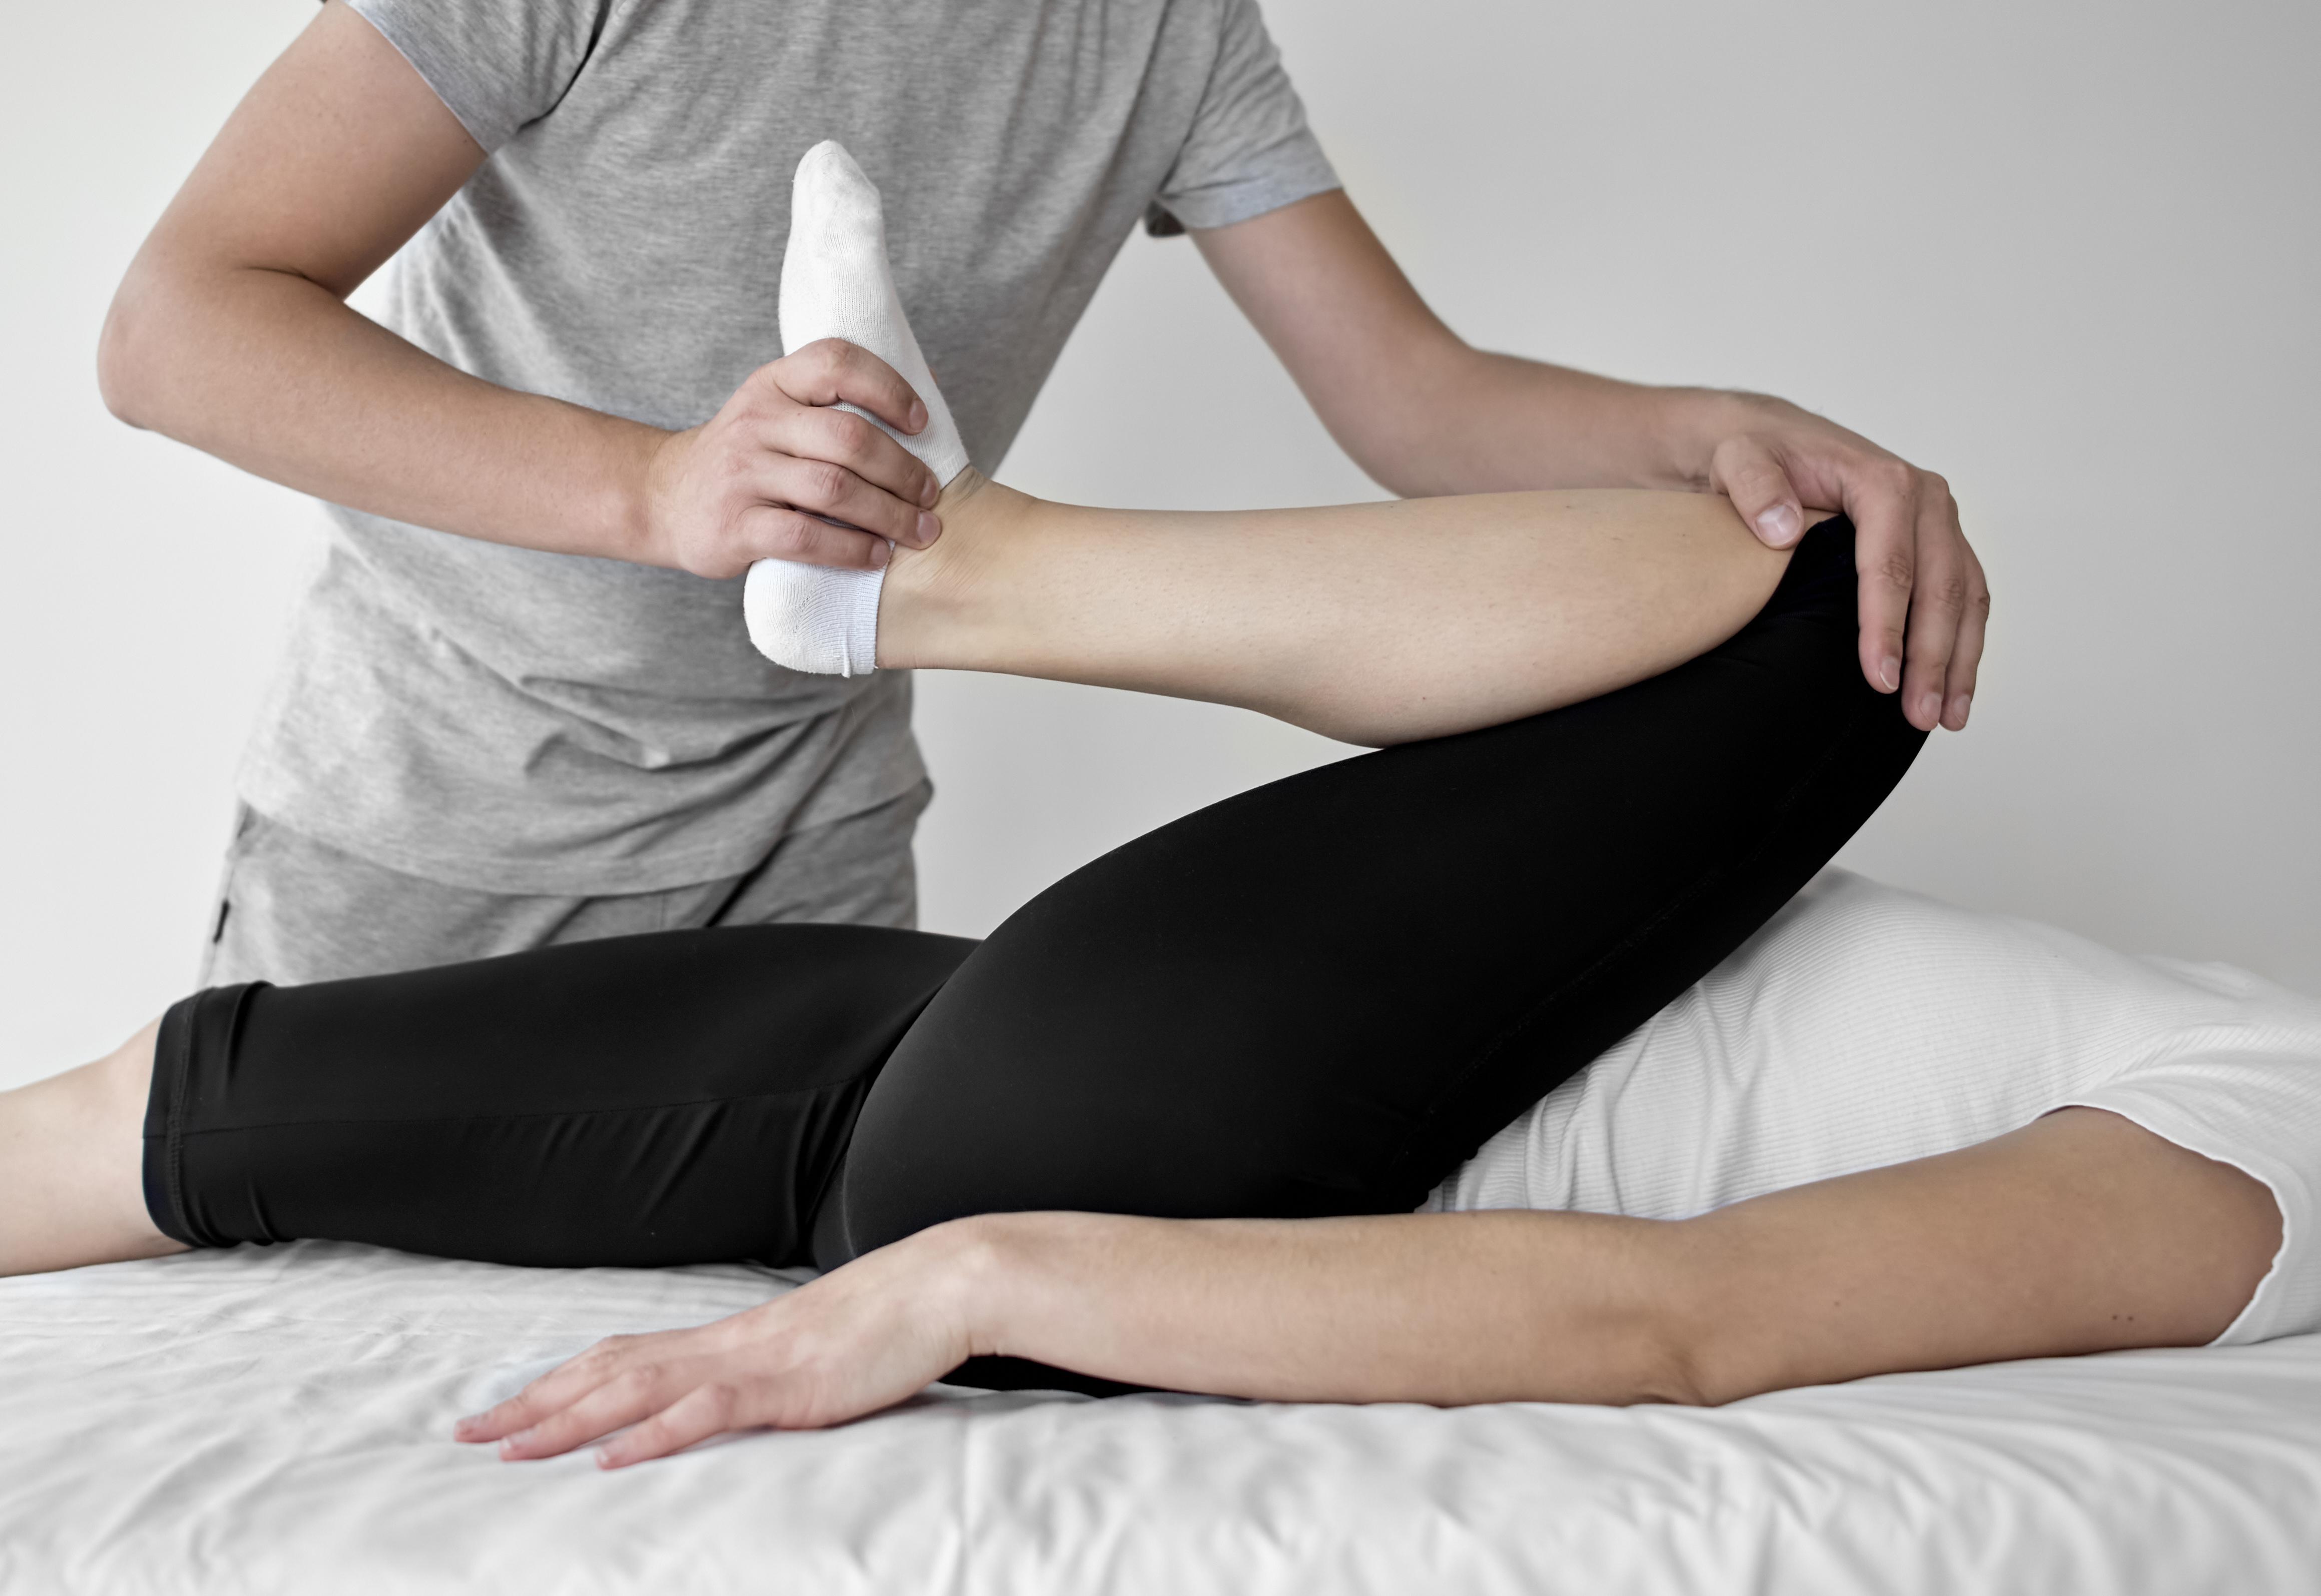 Six Questions Answered About Physical Therapy